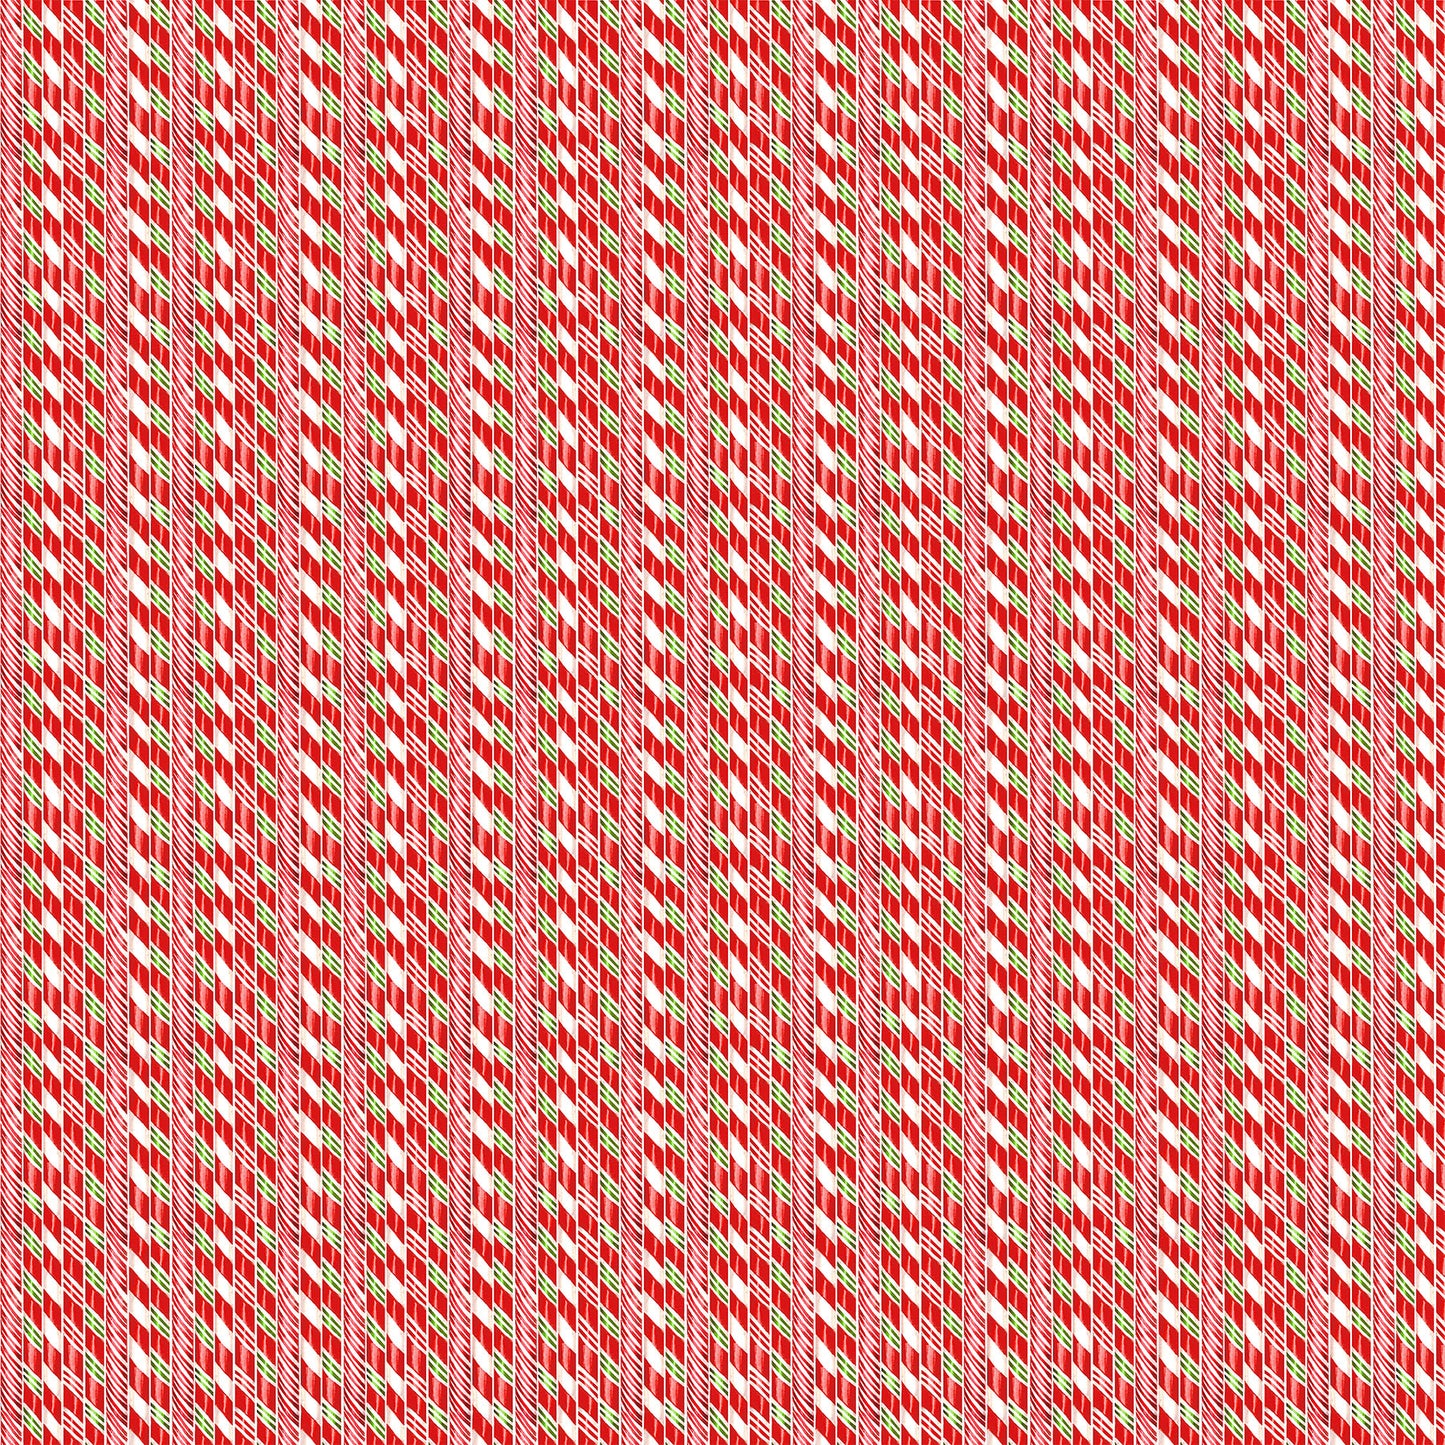 New Arrival: Sugar Coated Digital by Deborah Edwards White/Multi  DP27146-10 Cotton Woven Fabric